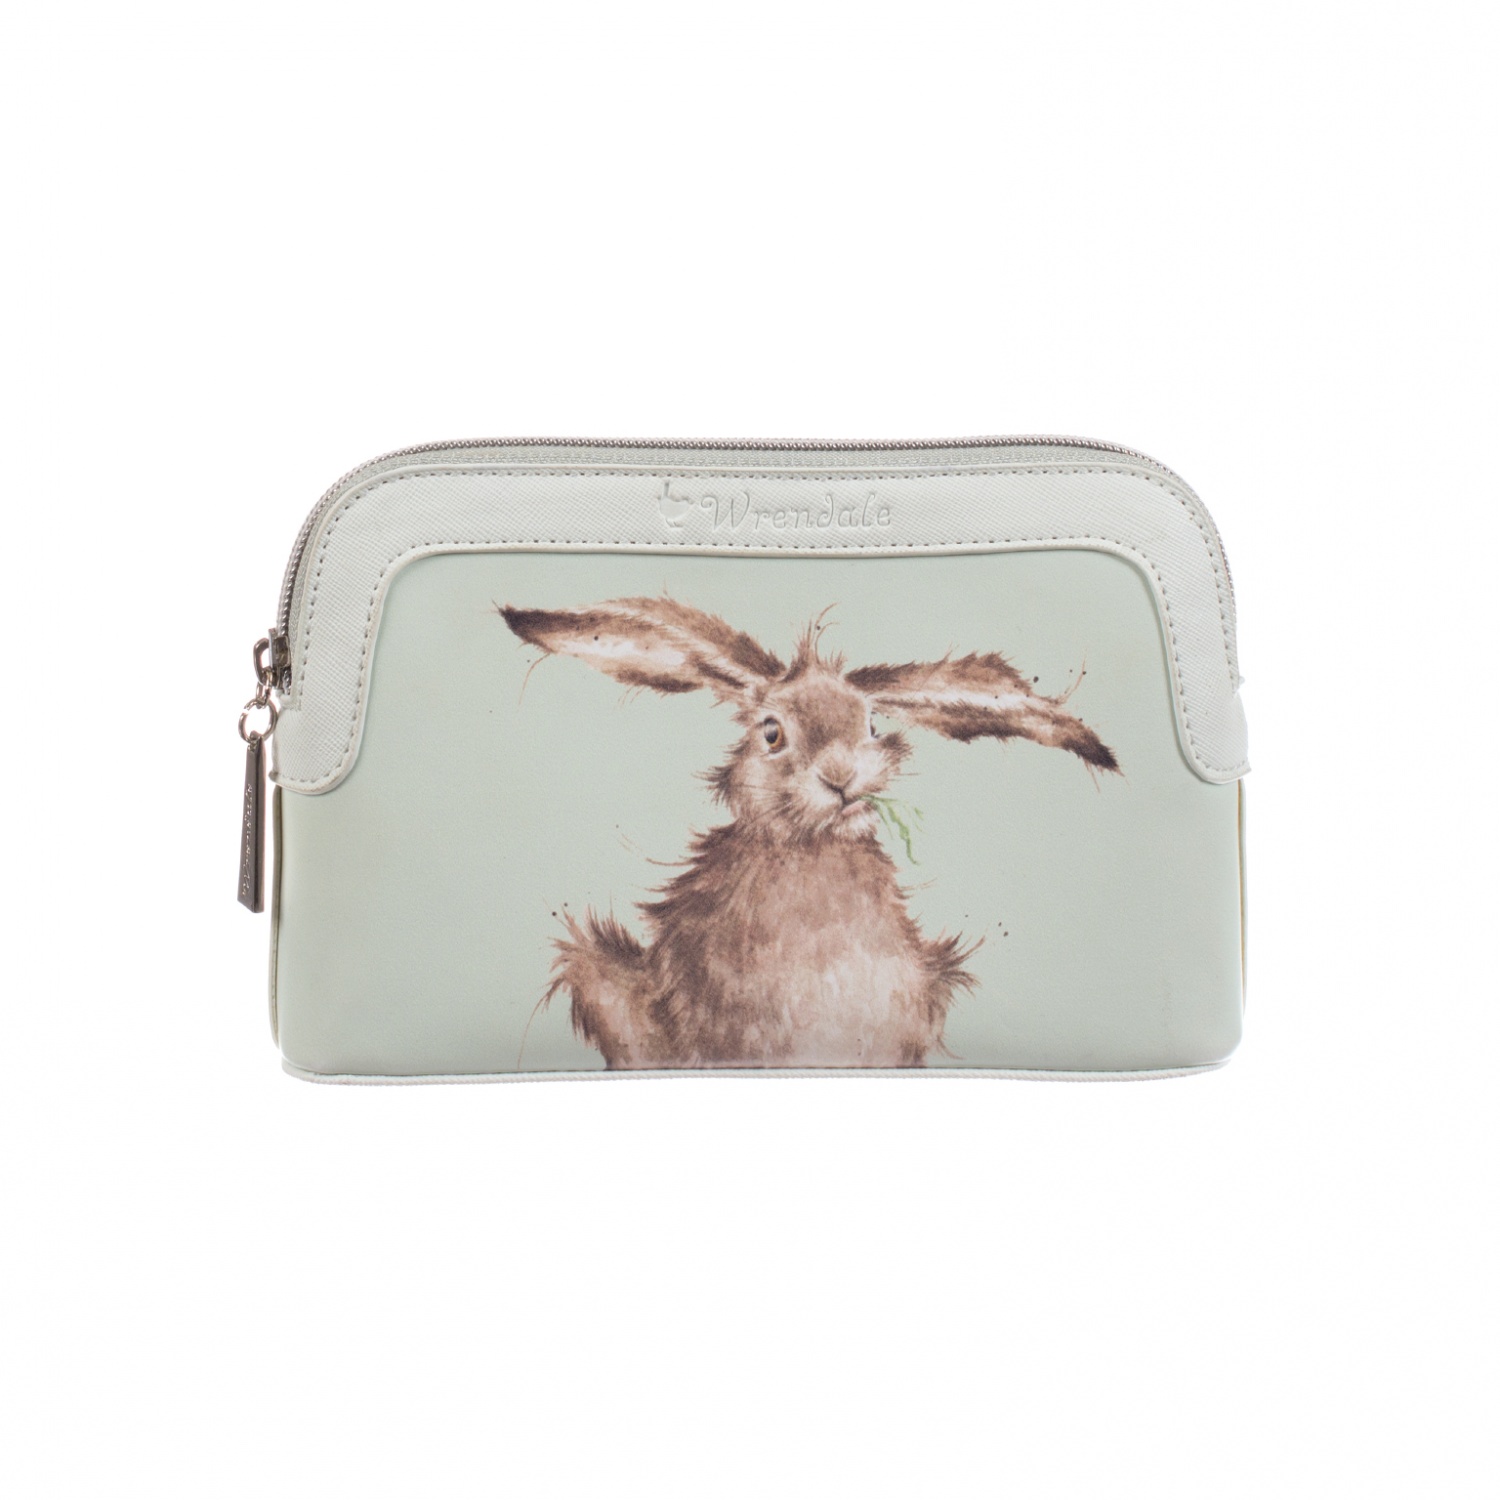 Wrendale Designs Small Cosmetic Bag - Hare Design